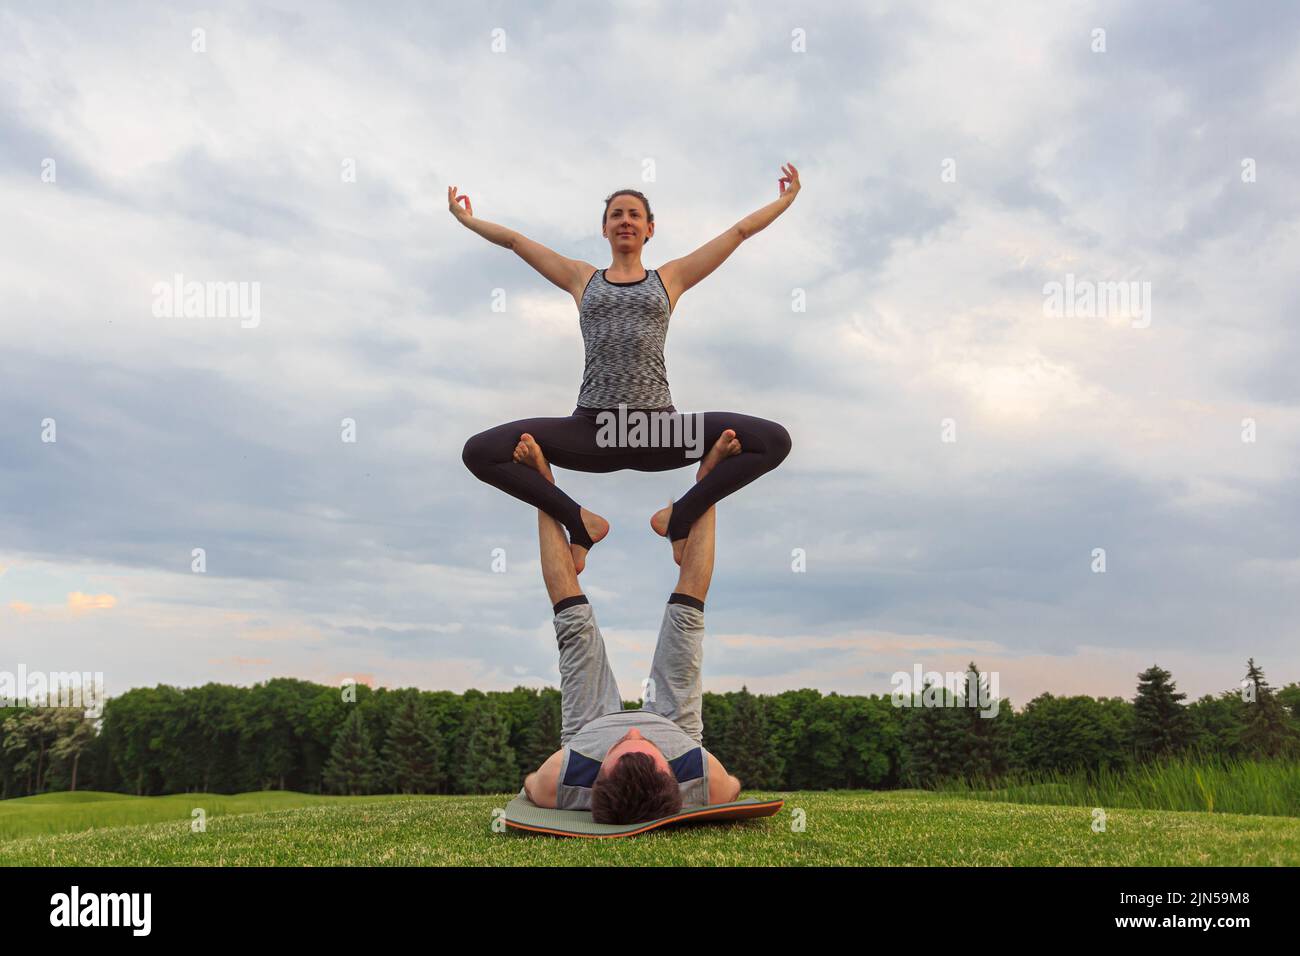 Young couple doing acro yoga in park. Man lying on grass and balancing woman in his feet Stock Photo